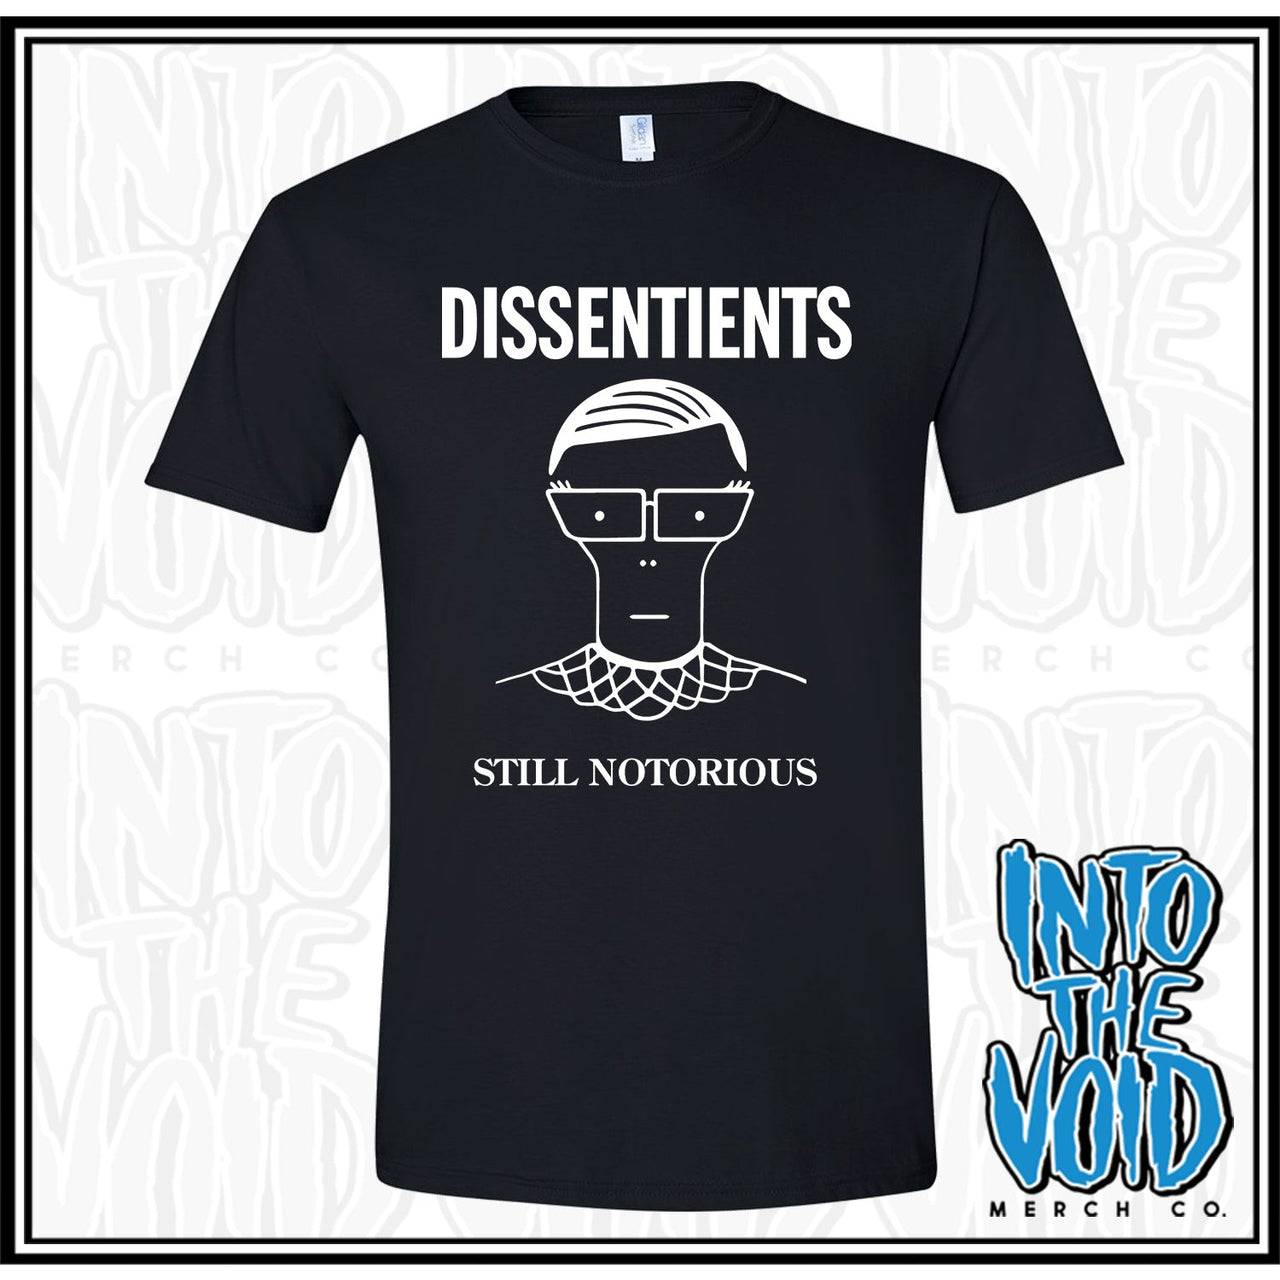 DISSENTIENTS - Short Sleeve T-Shirt - INTO THE VOID Merch Co.